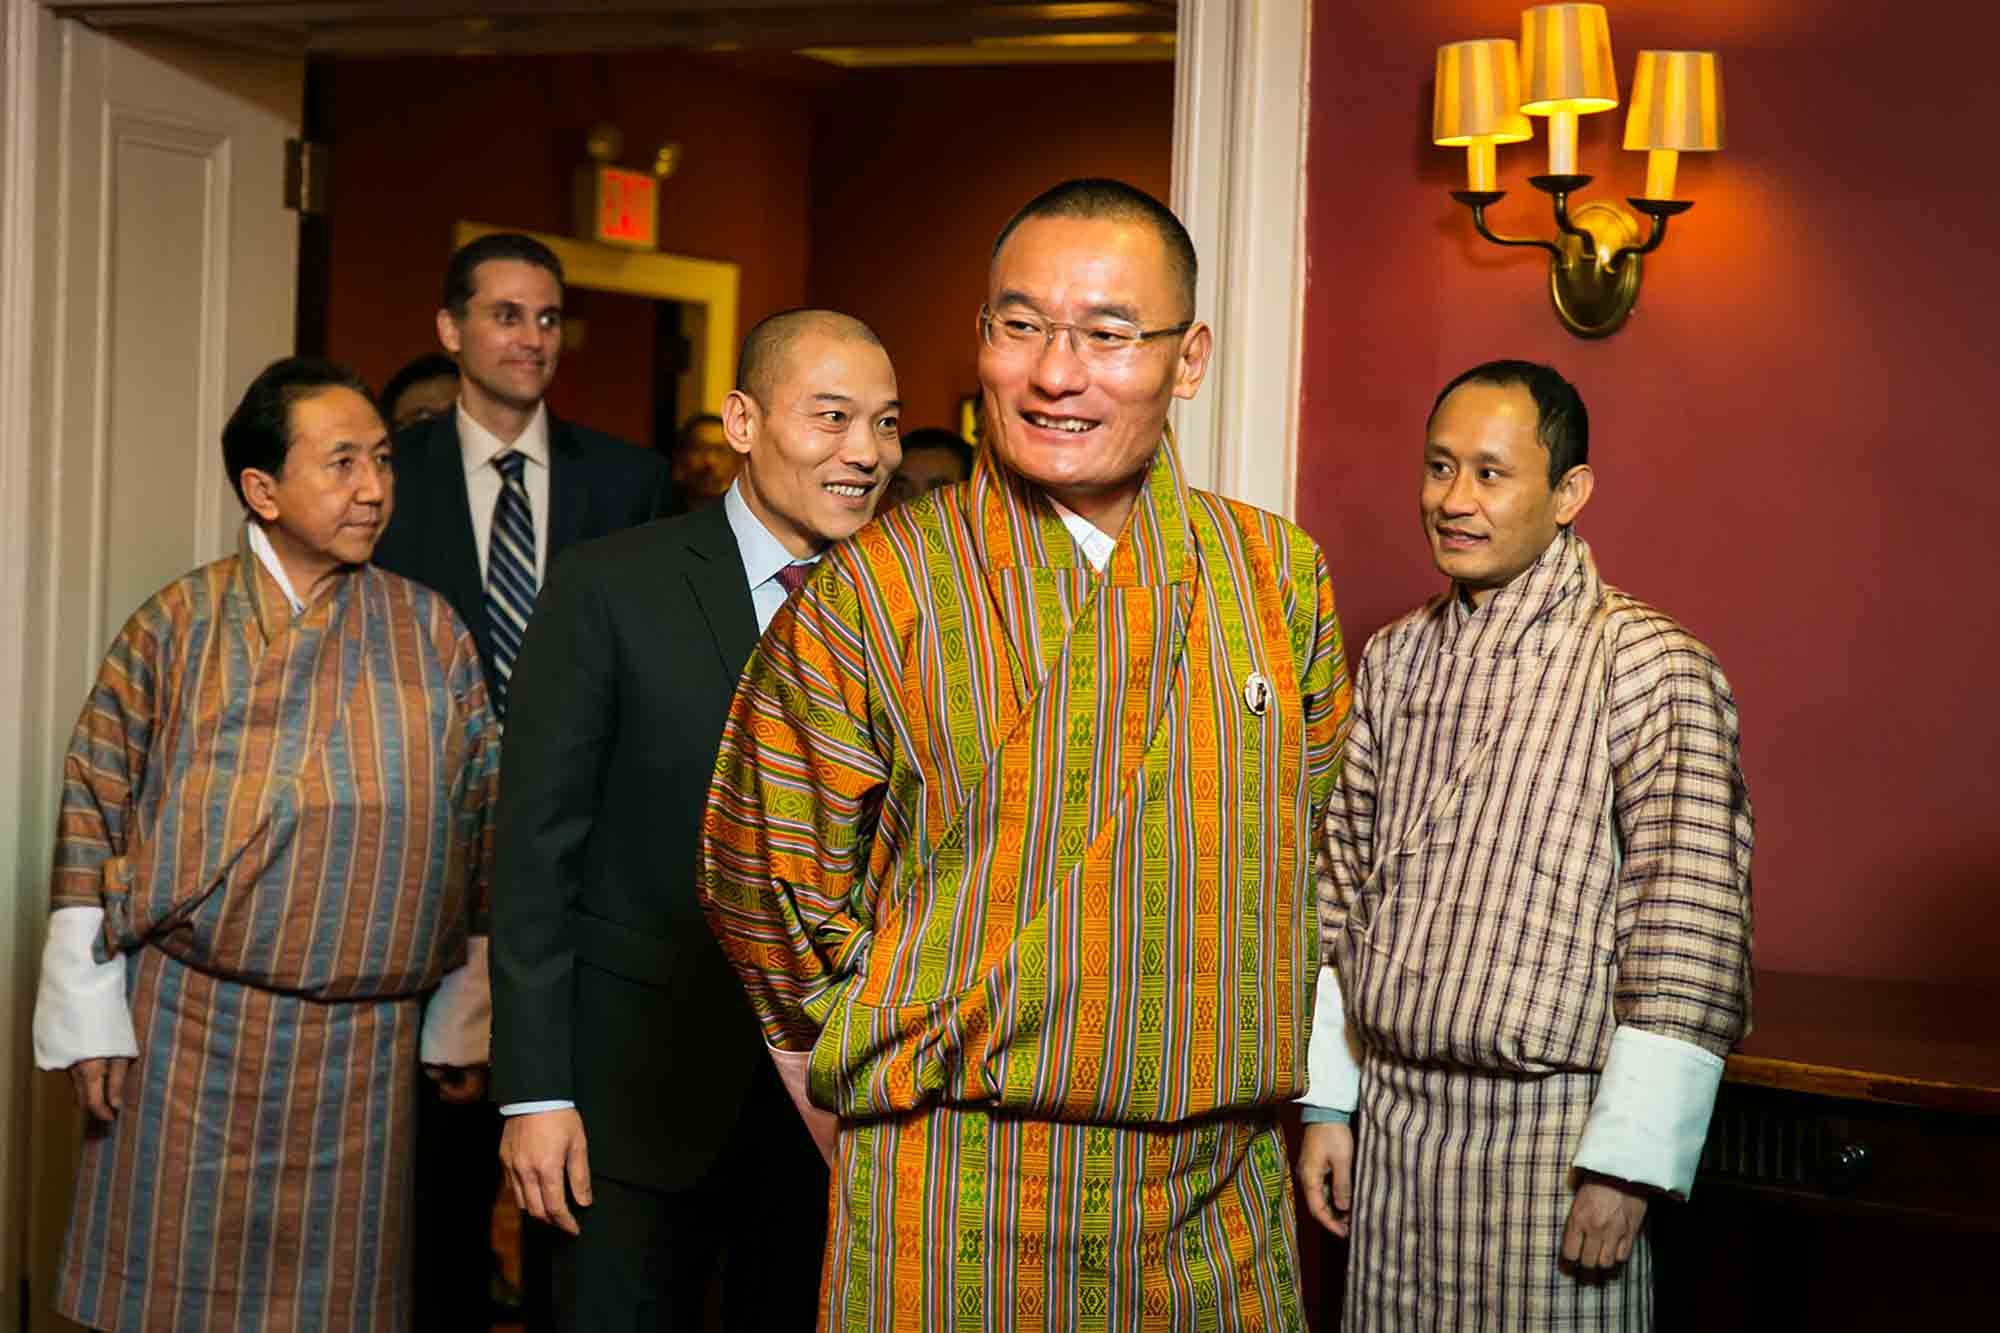 Nepal diplomats dressed in traditional clothing by San Antonio corporate event photographer, Kelly Williams (Copy)